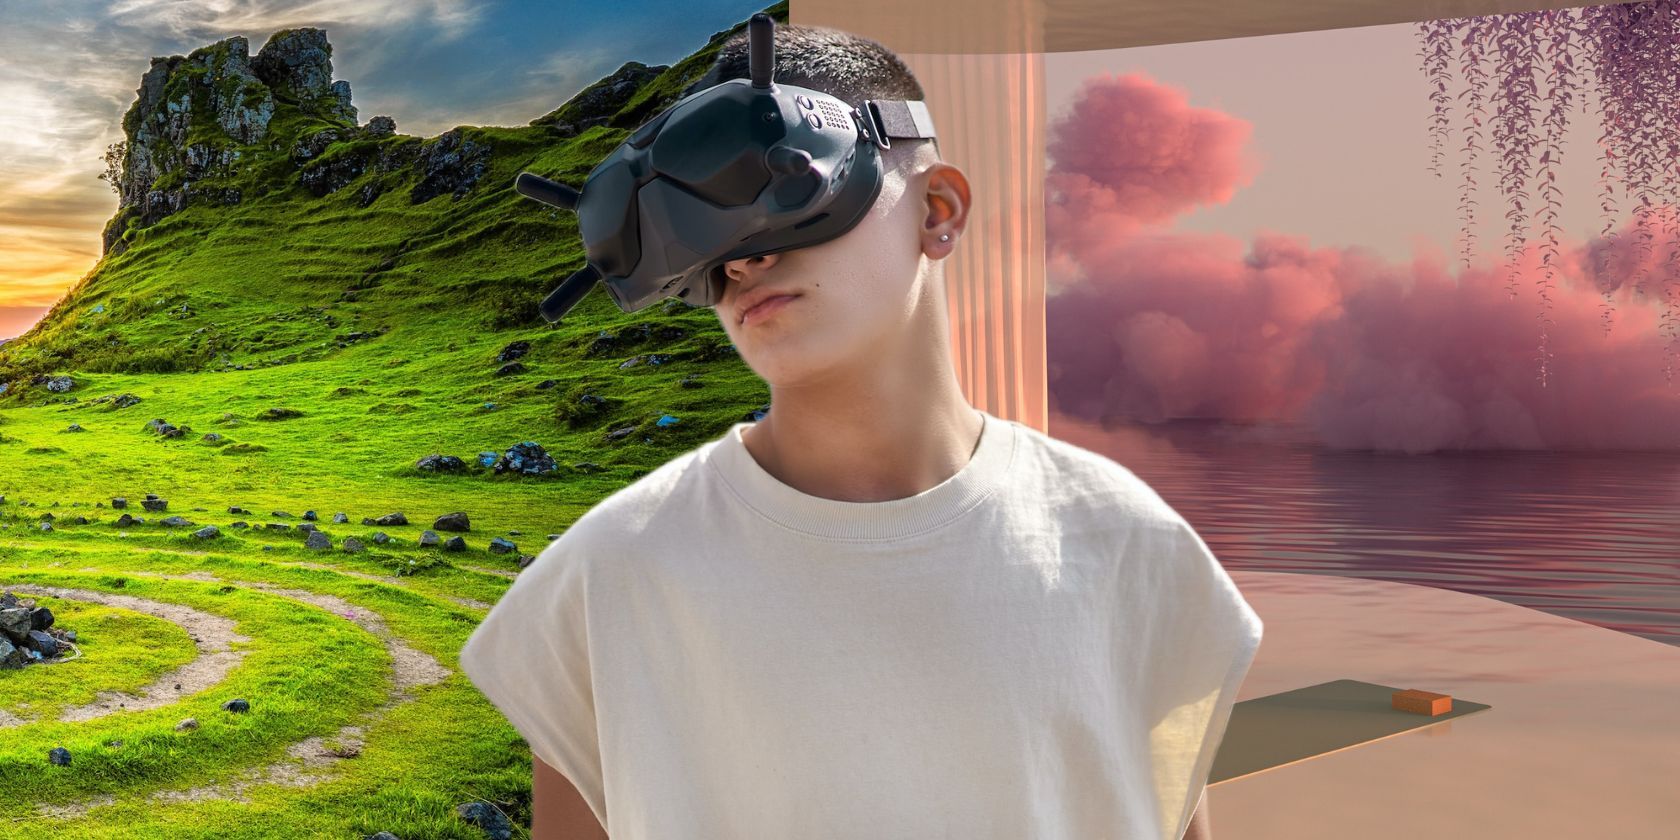 Buzz Cut Man Wearing VR in Between Pink and Green Worlds